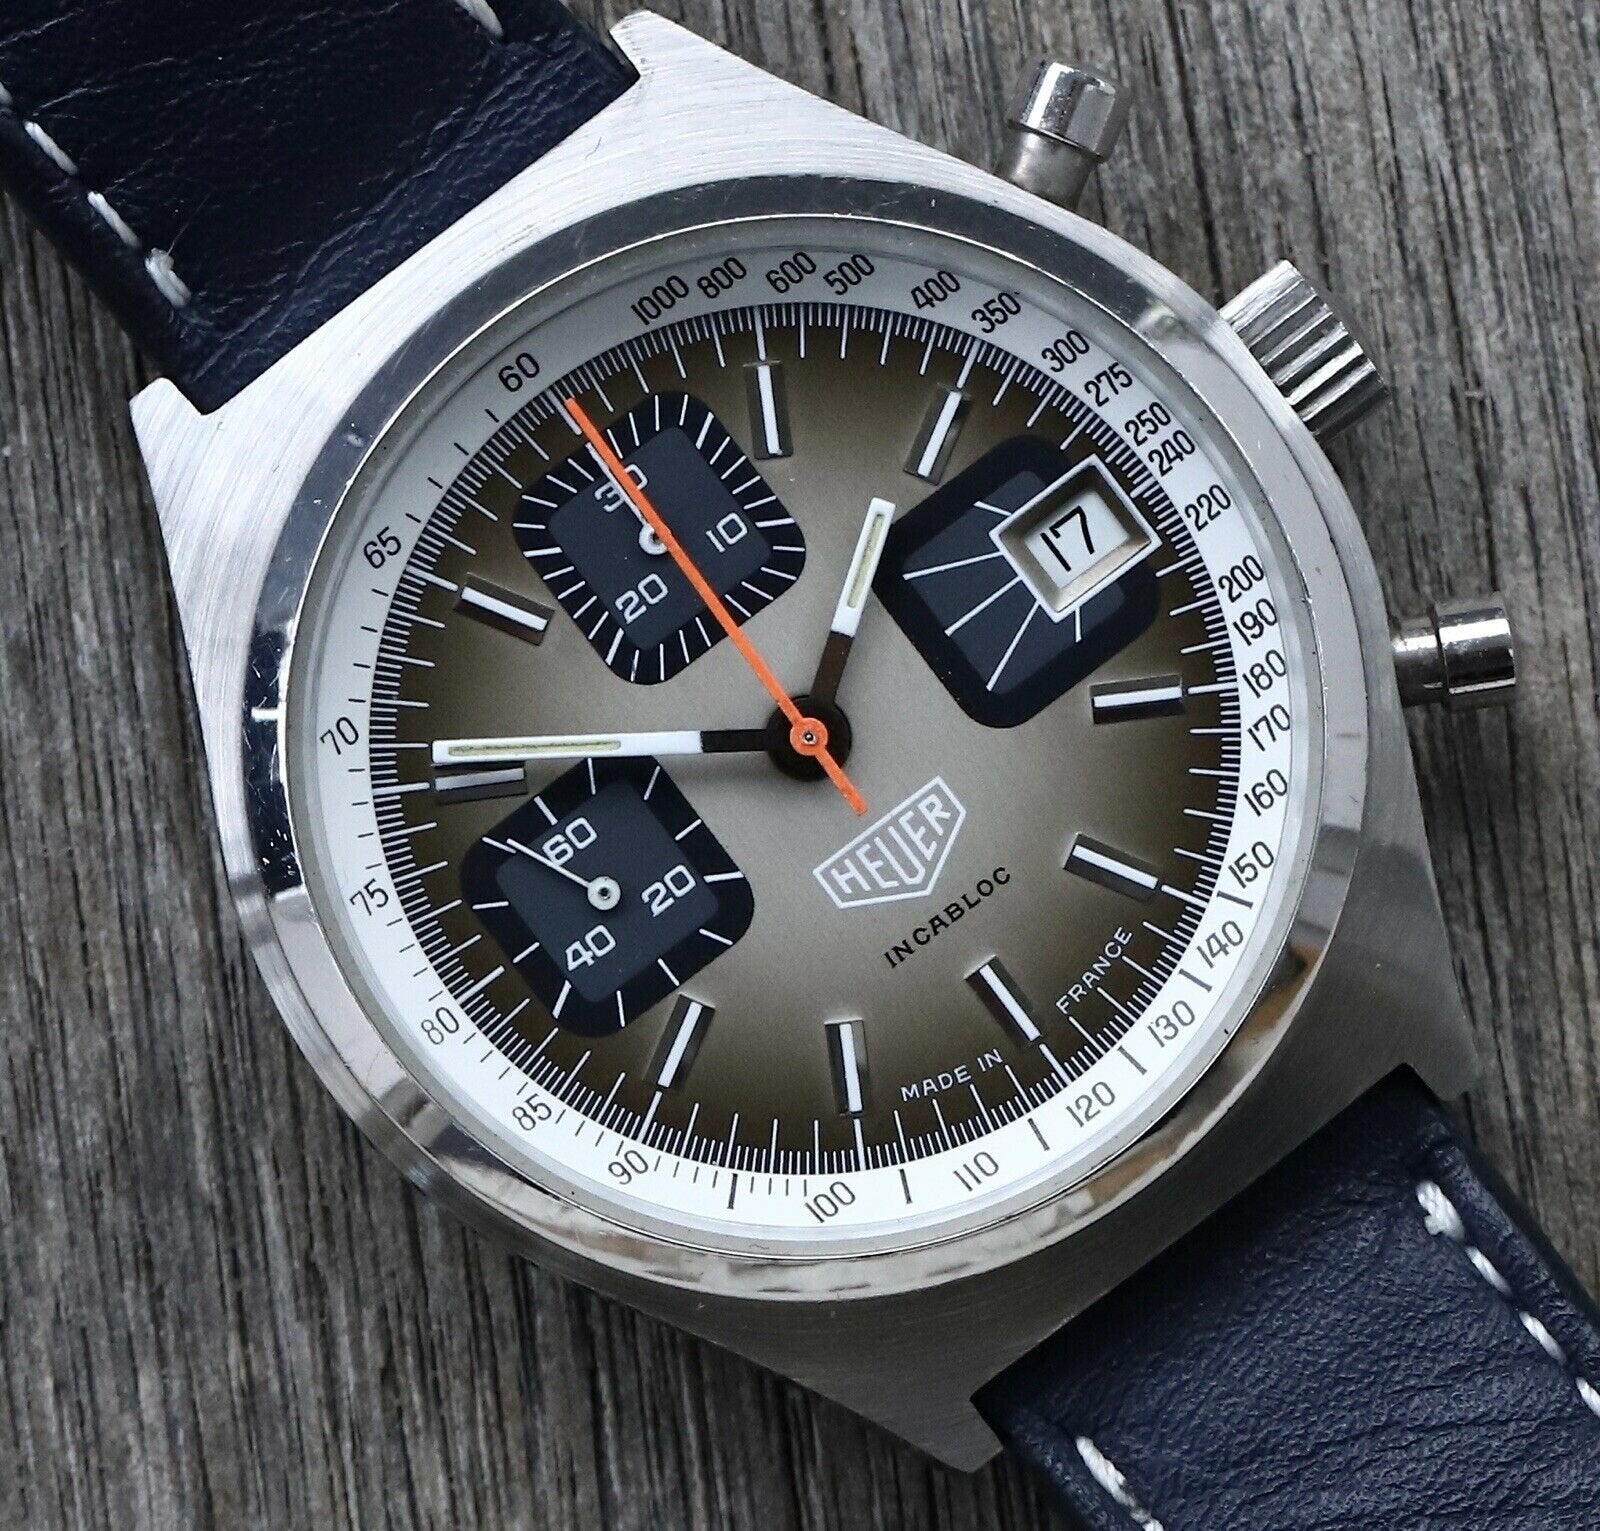 Heuer_Incabloc_97517_Vintage_Chronograph_-_Made_in_France_Watch_Vault_02.jpg